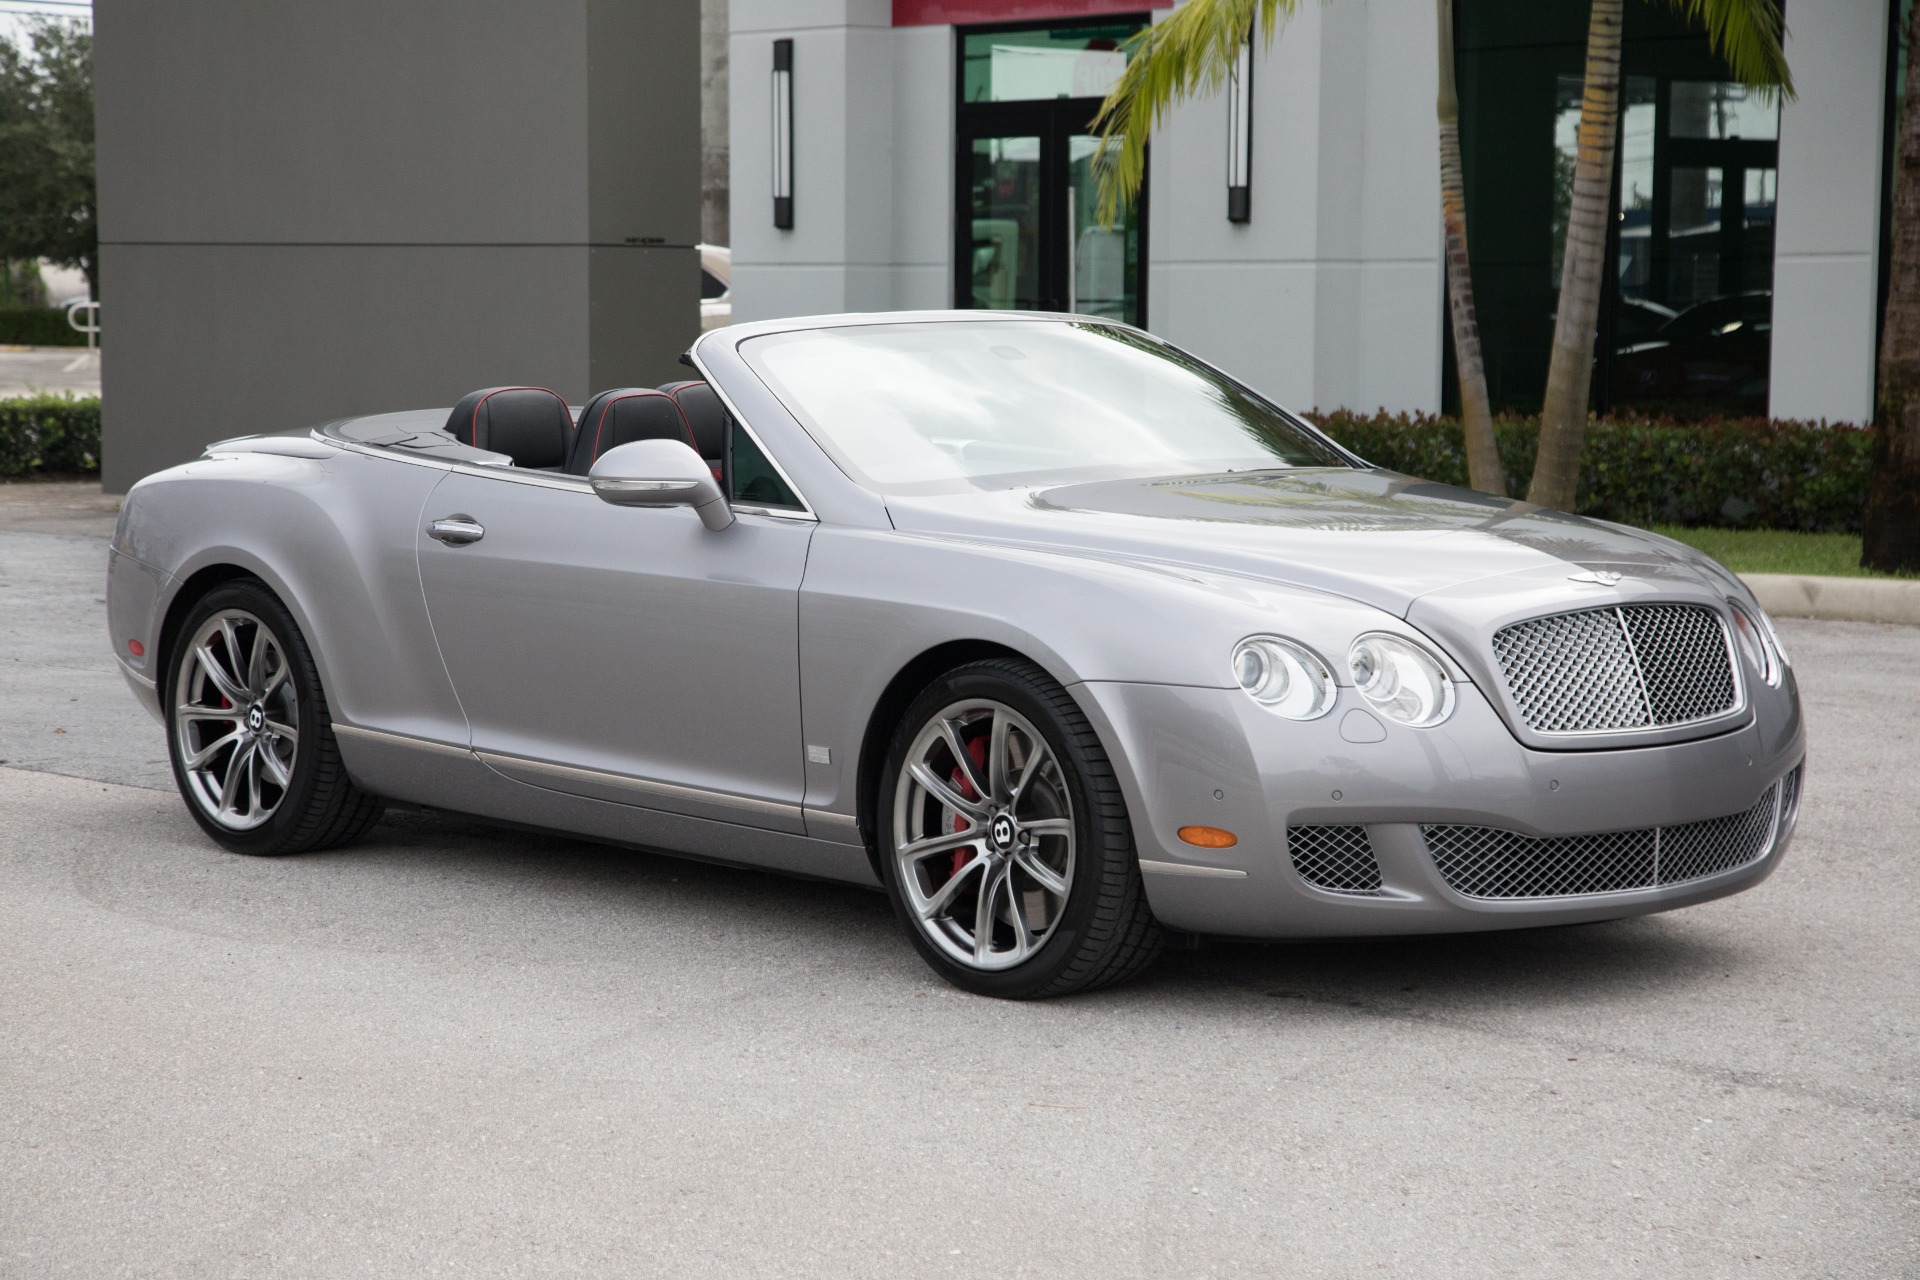 Unparalleled Luxury: The 2011 Bentley Continental GT